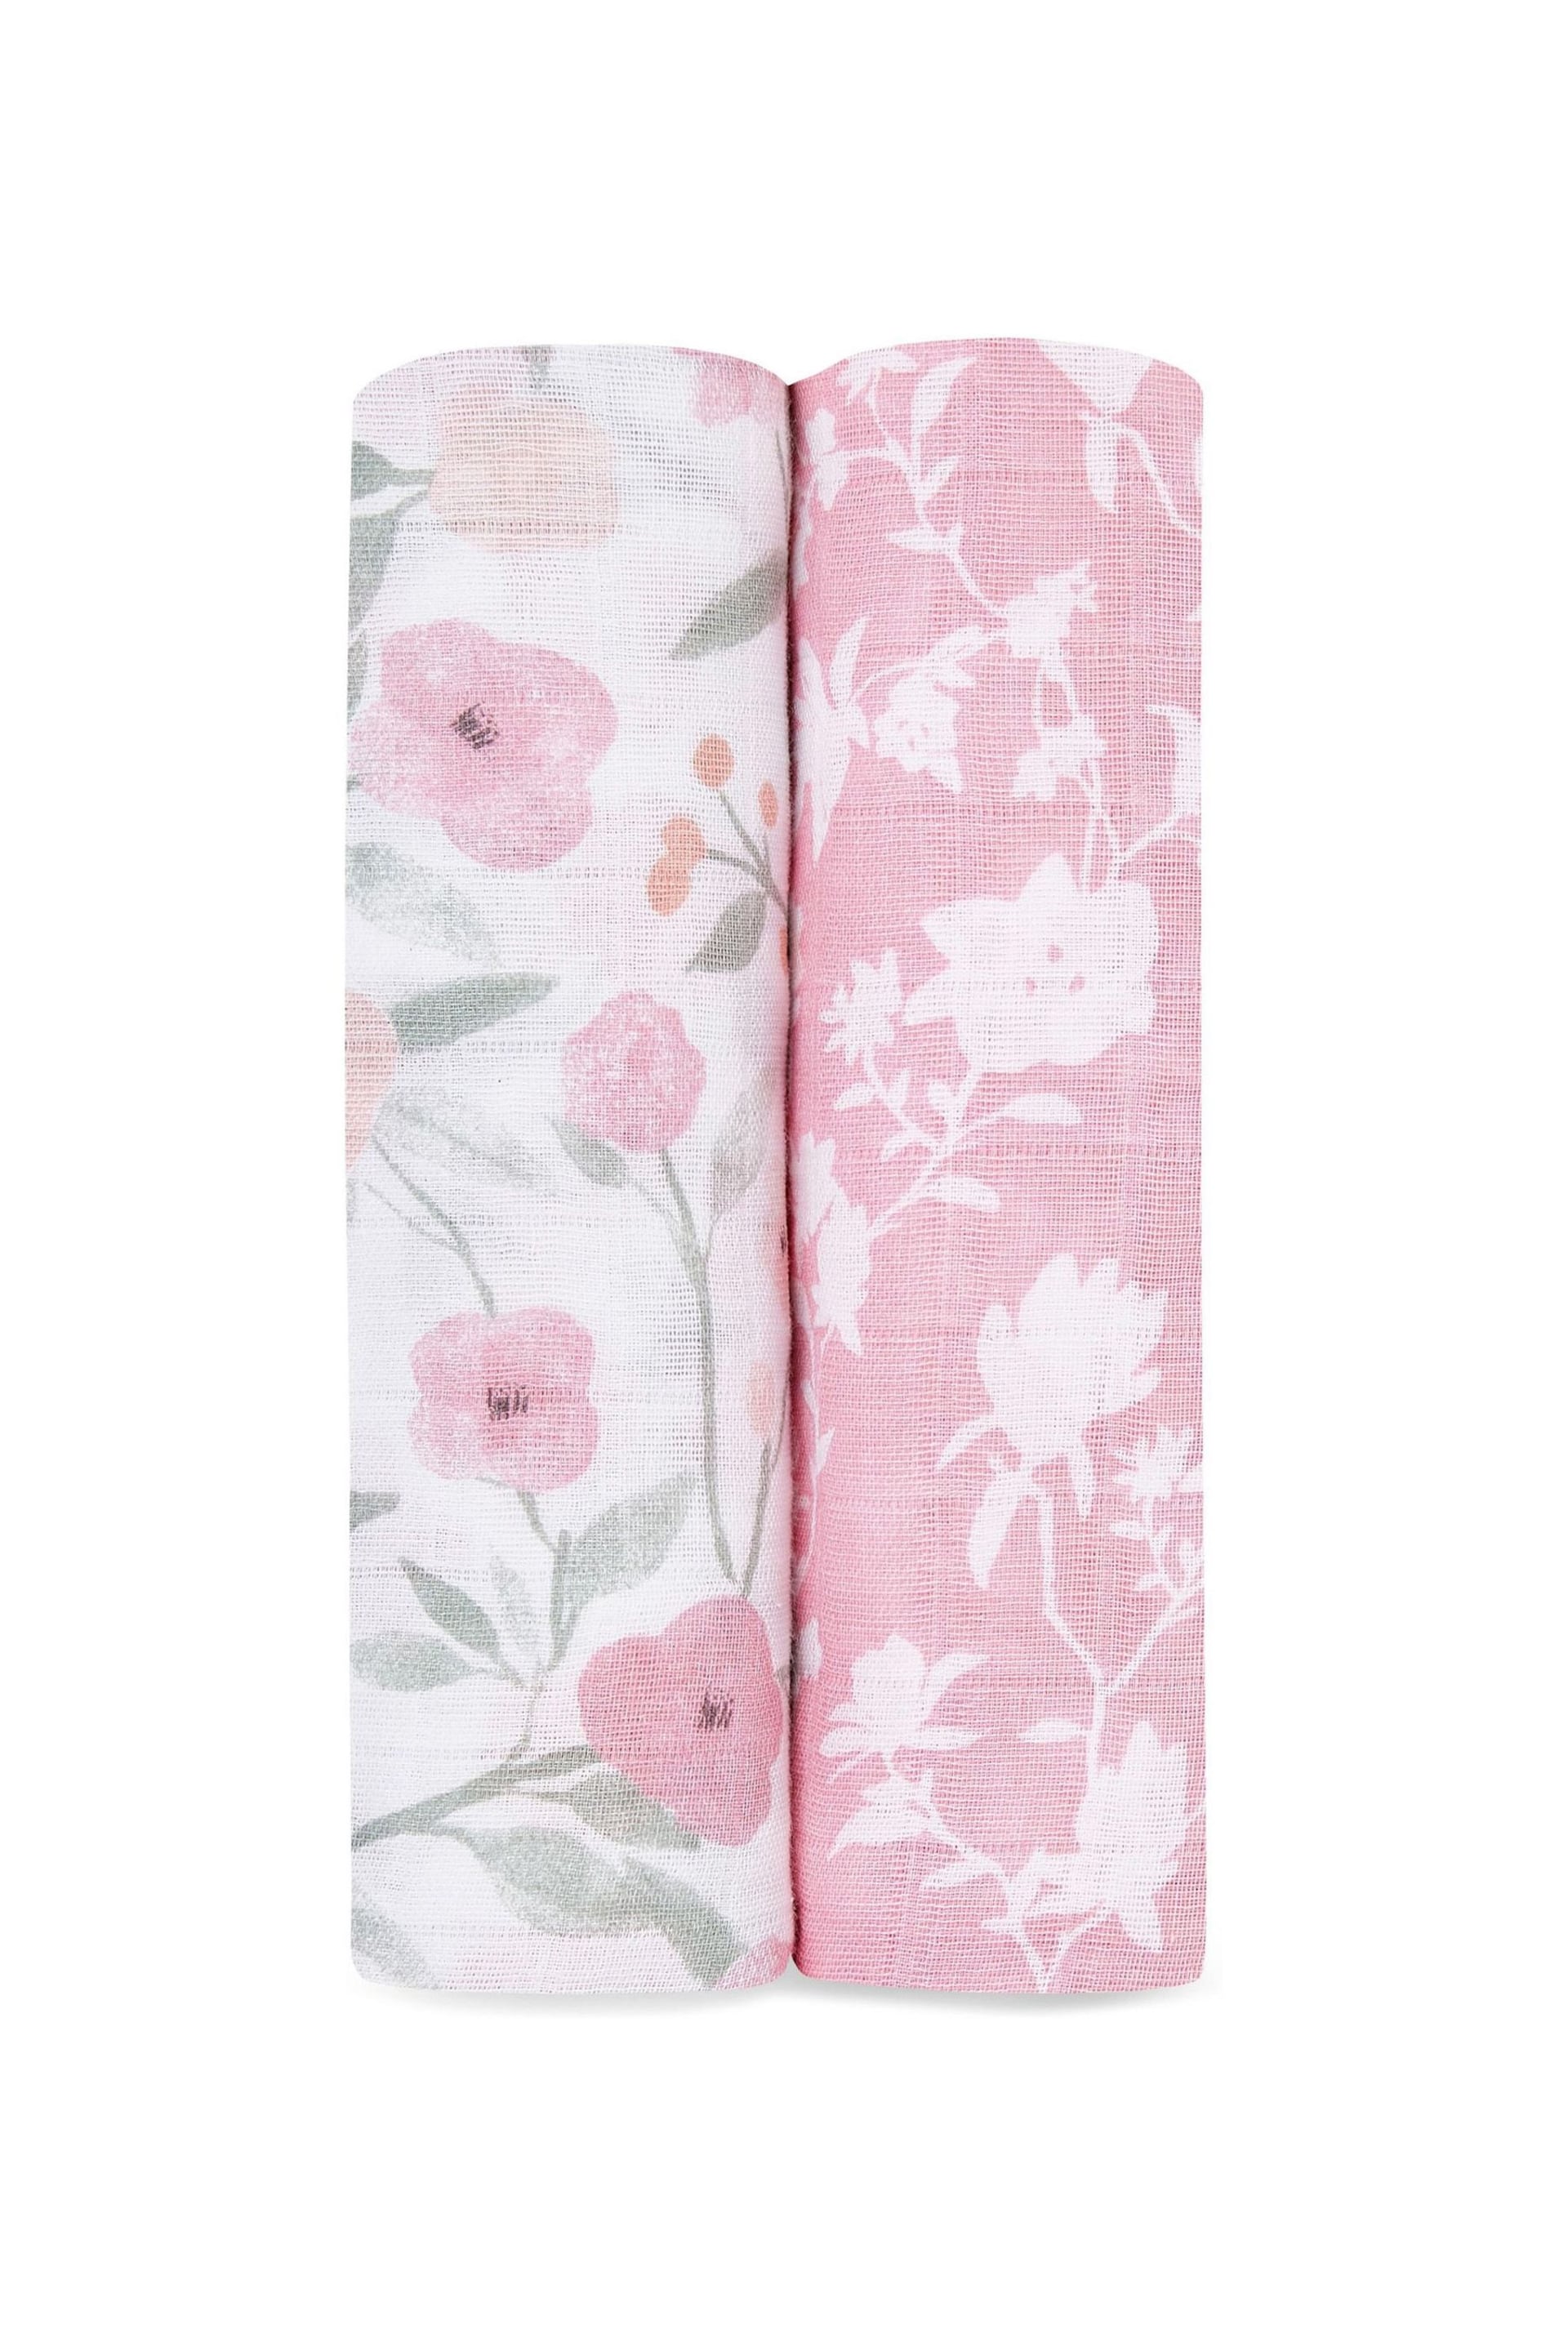 Aden + Anais Natural Ma Fleur Large Cotton Muslin Blankets 2-Pack - Image 1 of 5